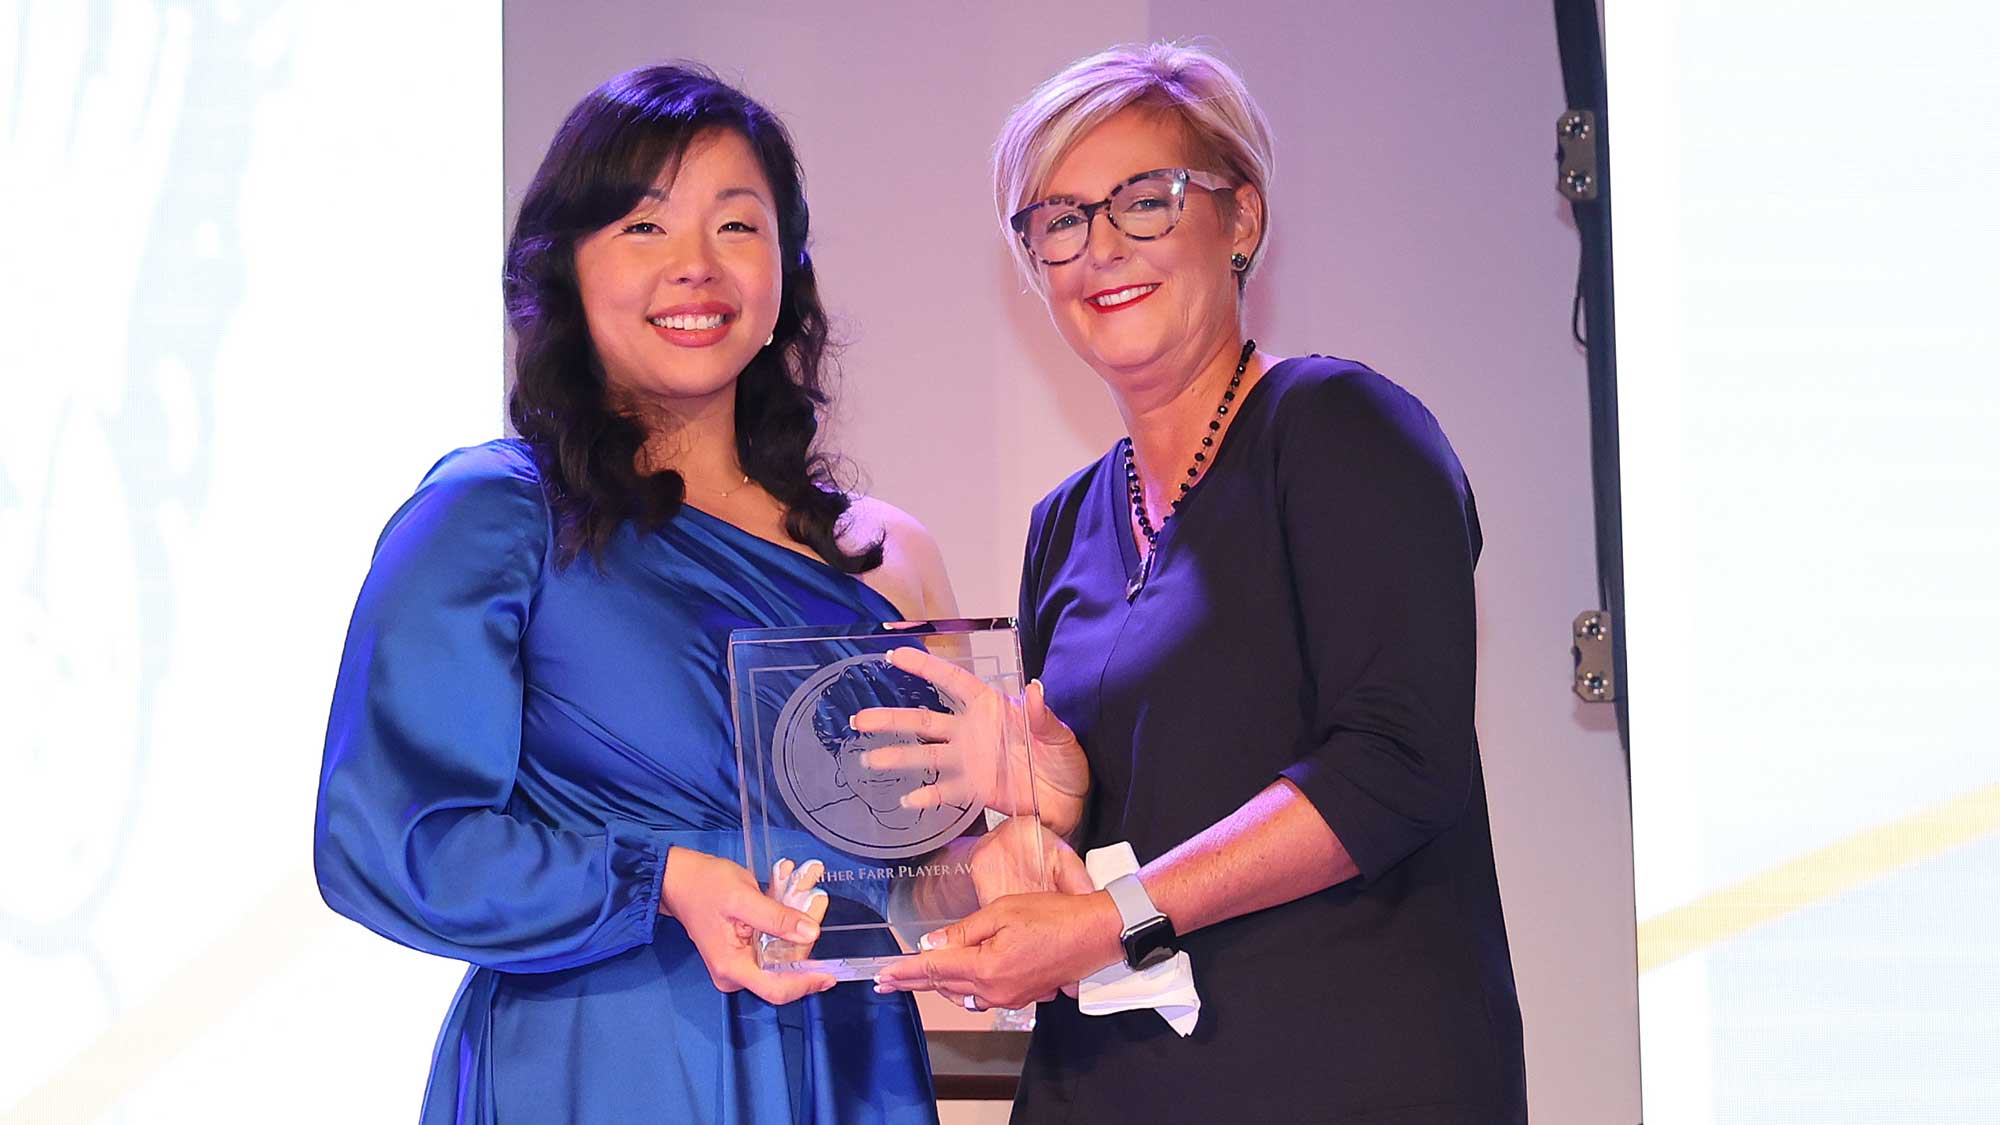 Jane Park of the United States poses with LPGA Player Director Vicki Goetze-Ackerman as she accepts the 2023 Heather Farr Perseverance Award during the 2023 LPGA Rolex Players Awards at Tiburon Golf Club on November 16, 2023 in Naples, Florida.